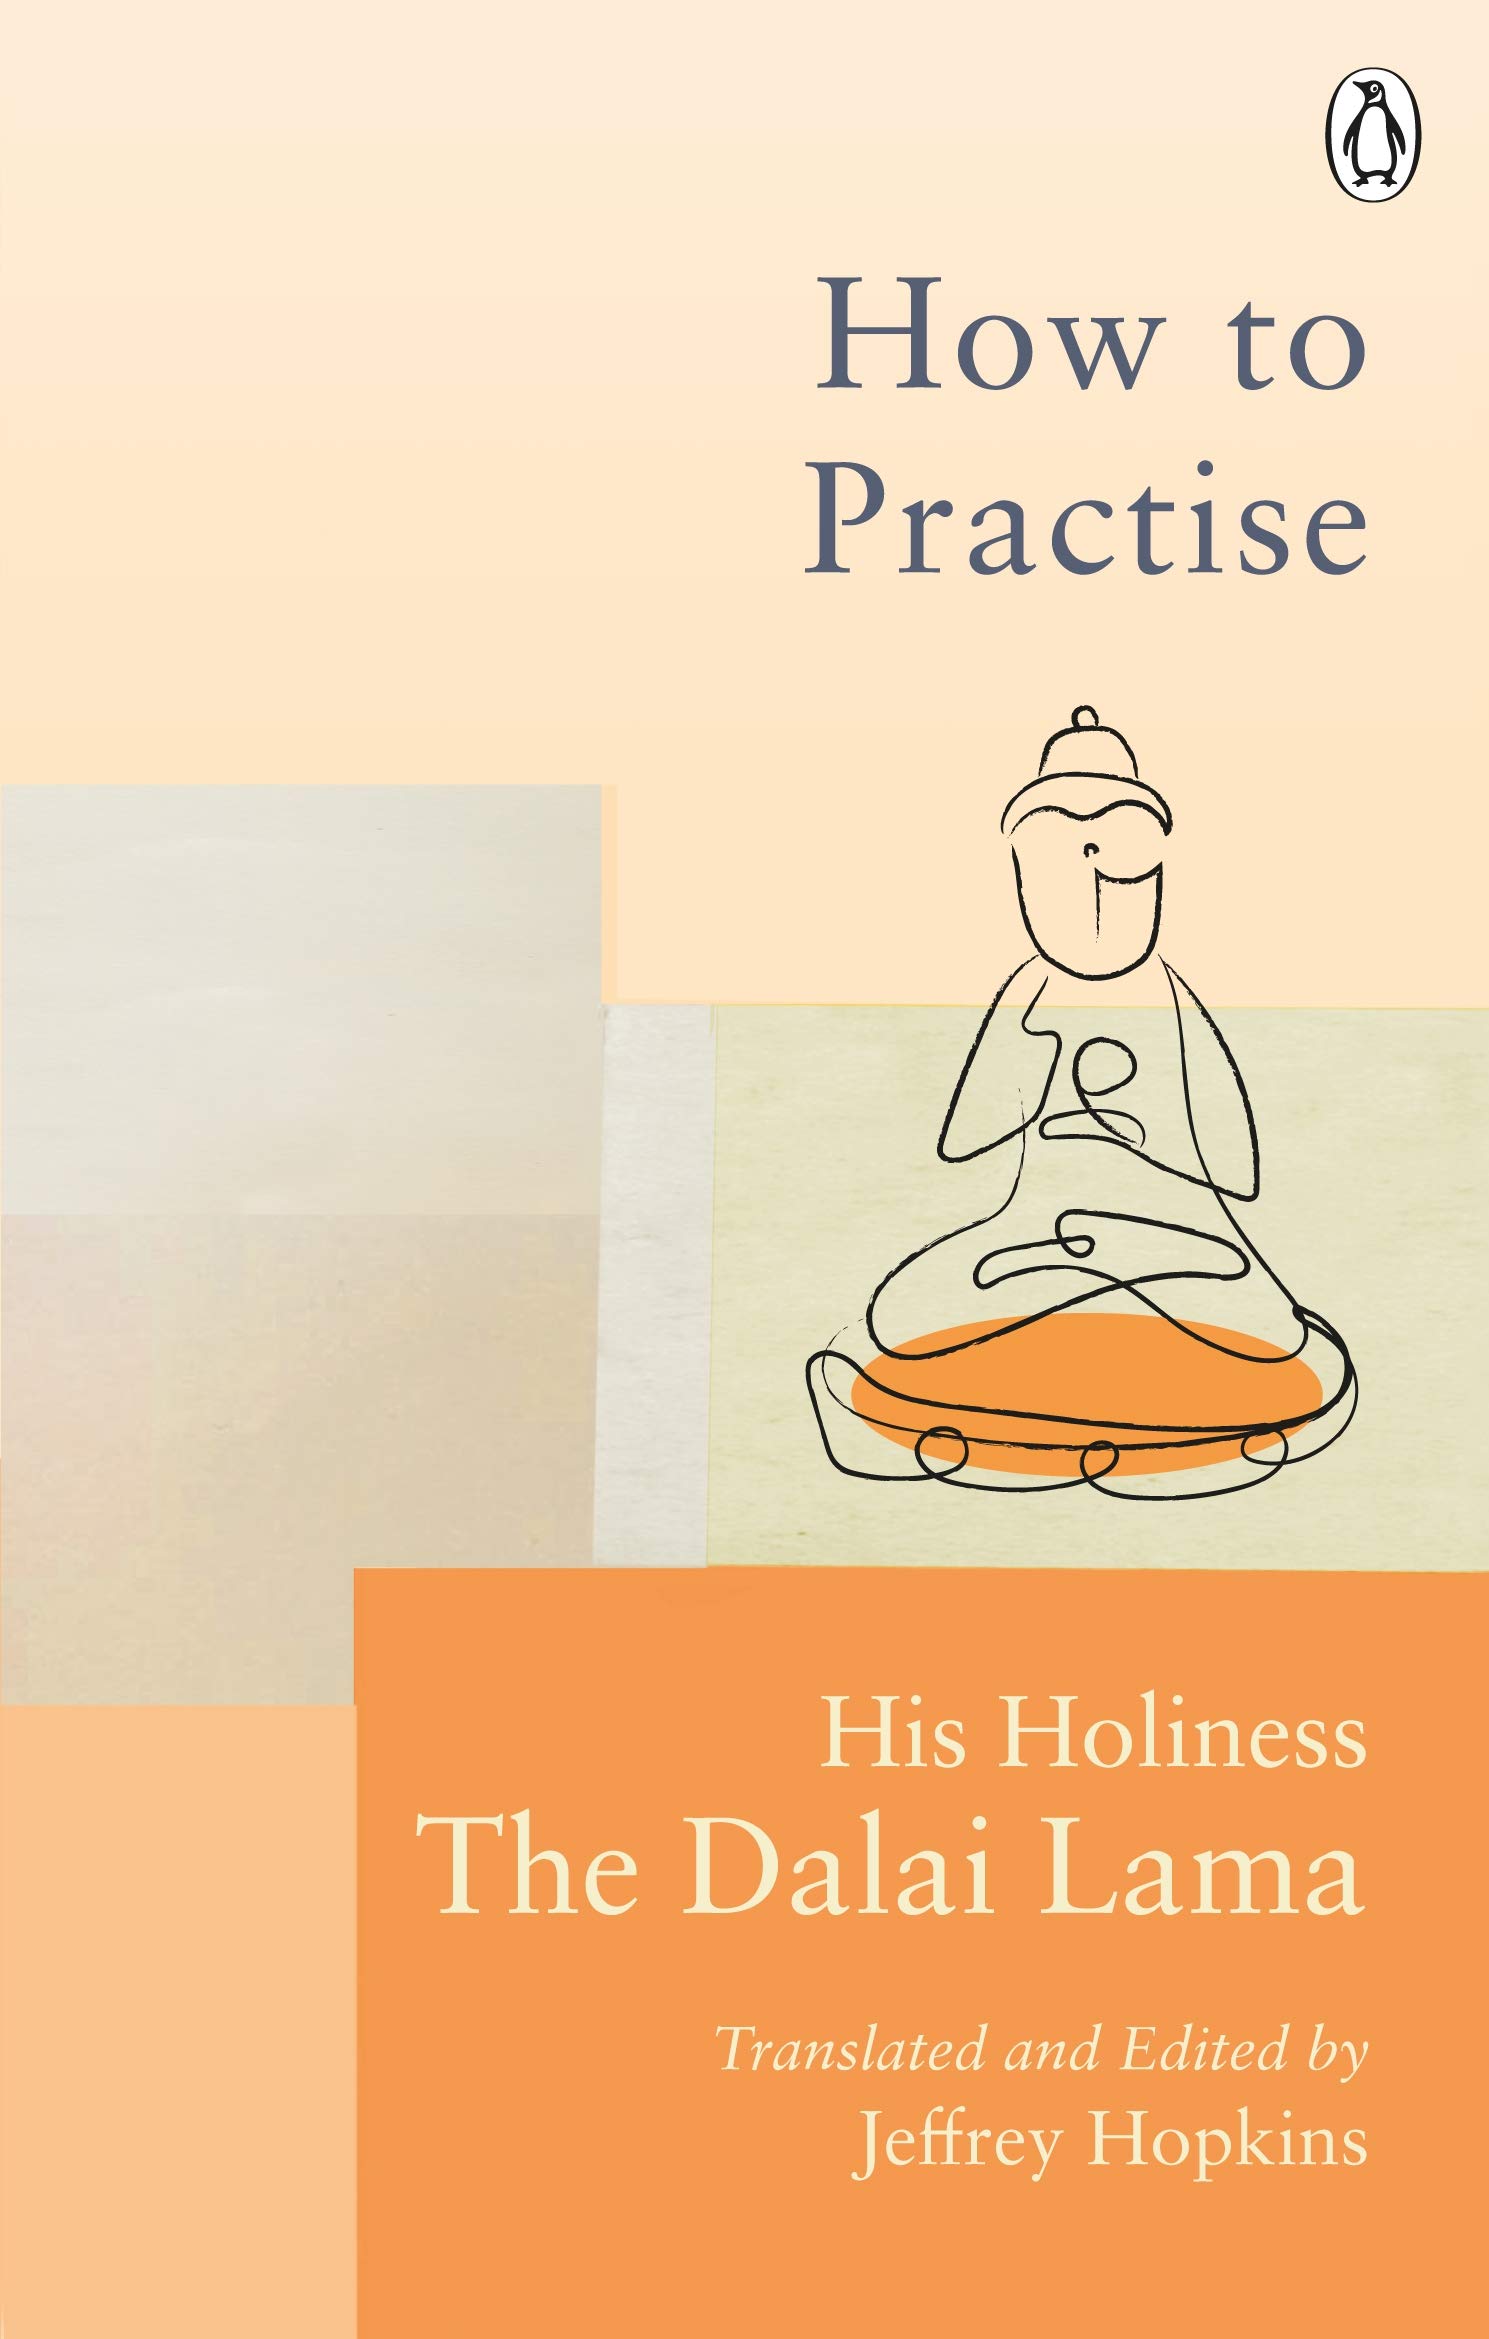 Sách Ngoại Văn - How To Practise: The Way to a Meaningful Life (Dalai Lama)